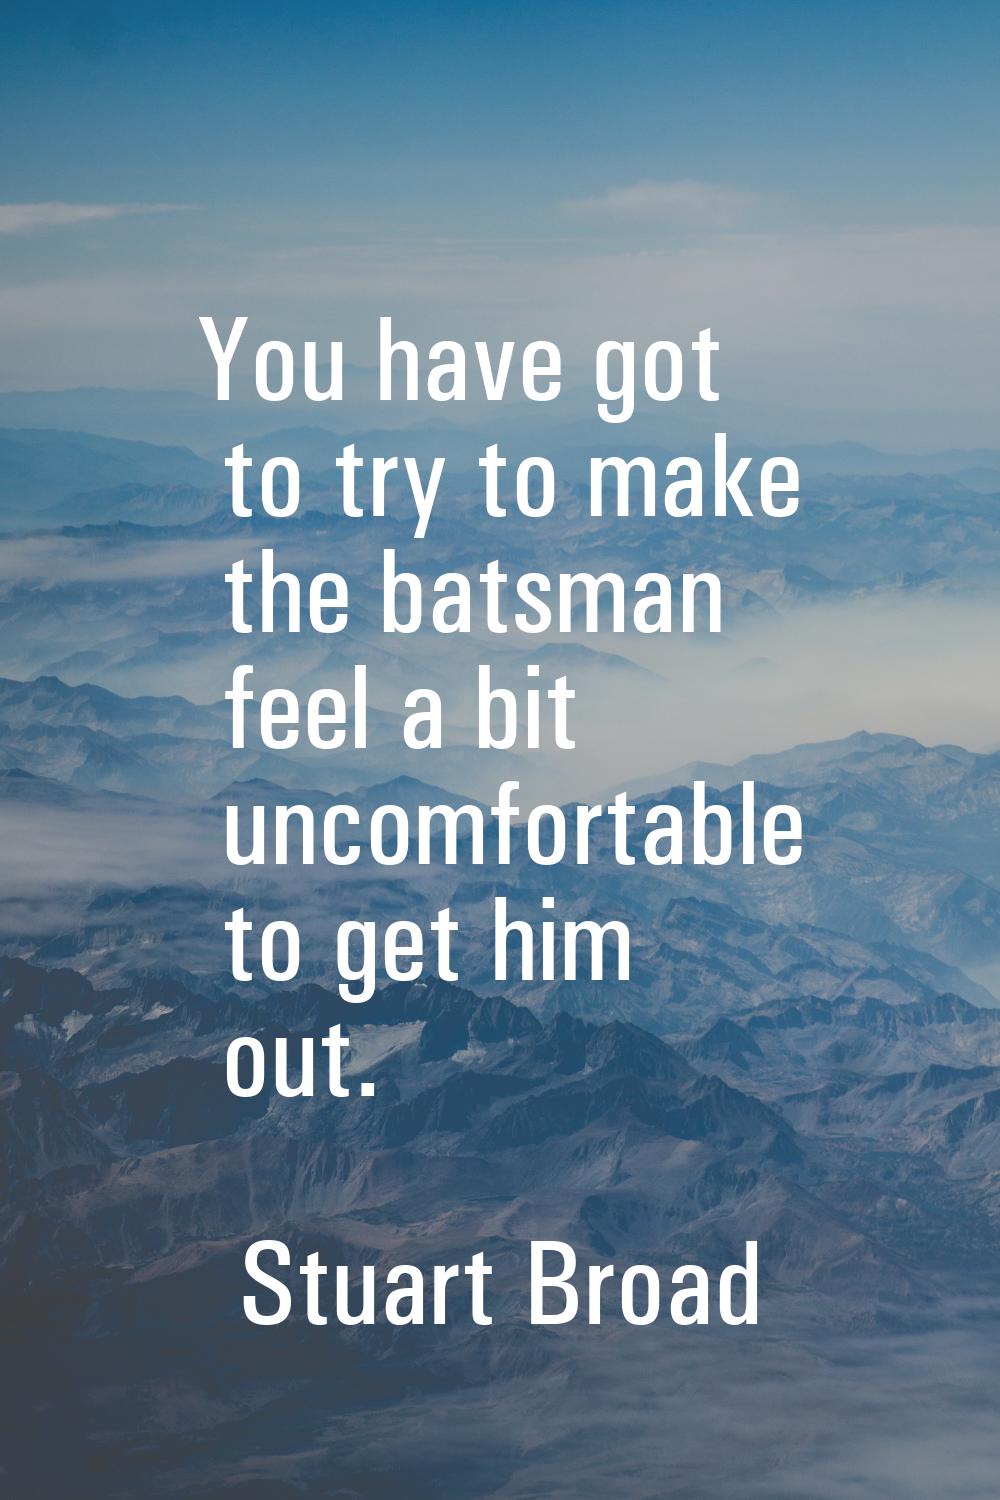 You have got to try to make the batsman feel a bit uncomfortable to get him out.